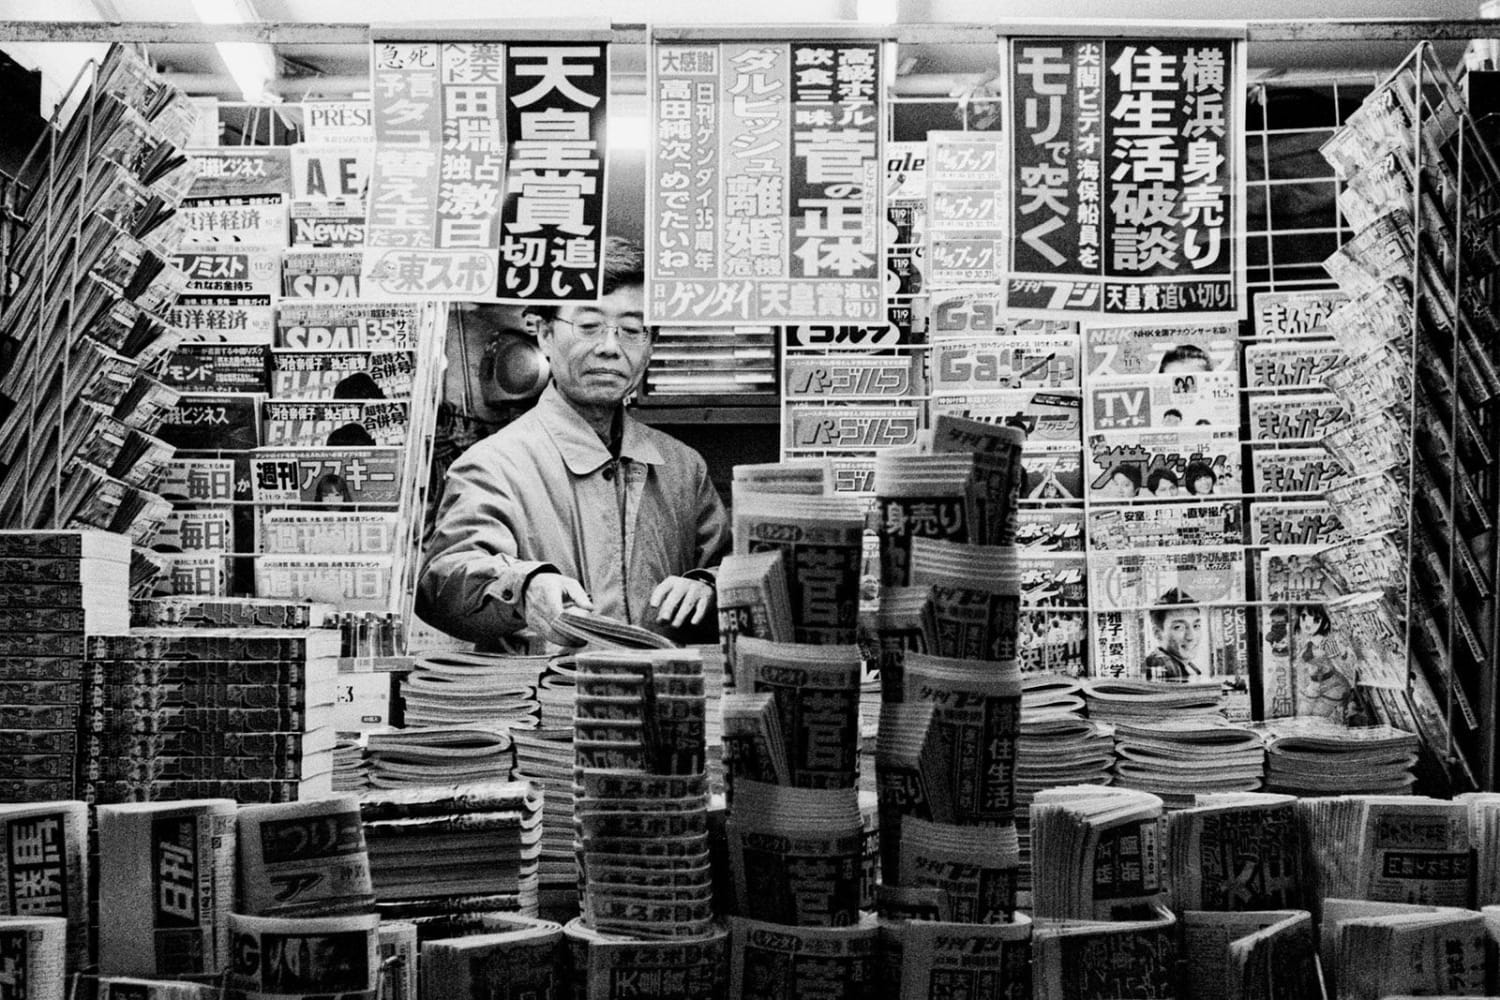 A man working at a magazine and newspaper stall in Japan. // Zeiss Ikon ZM + Zeiss Sonnar 50mm + Ilford HP5 @ 1600